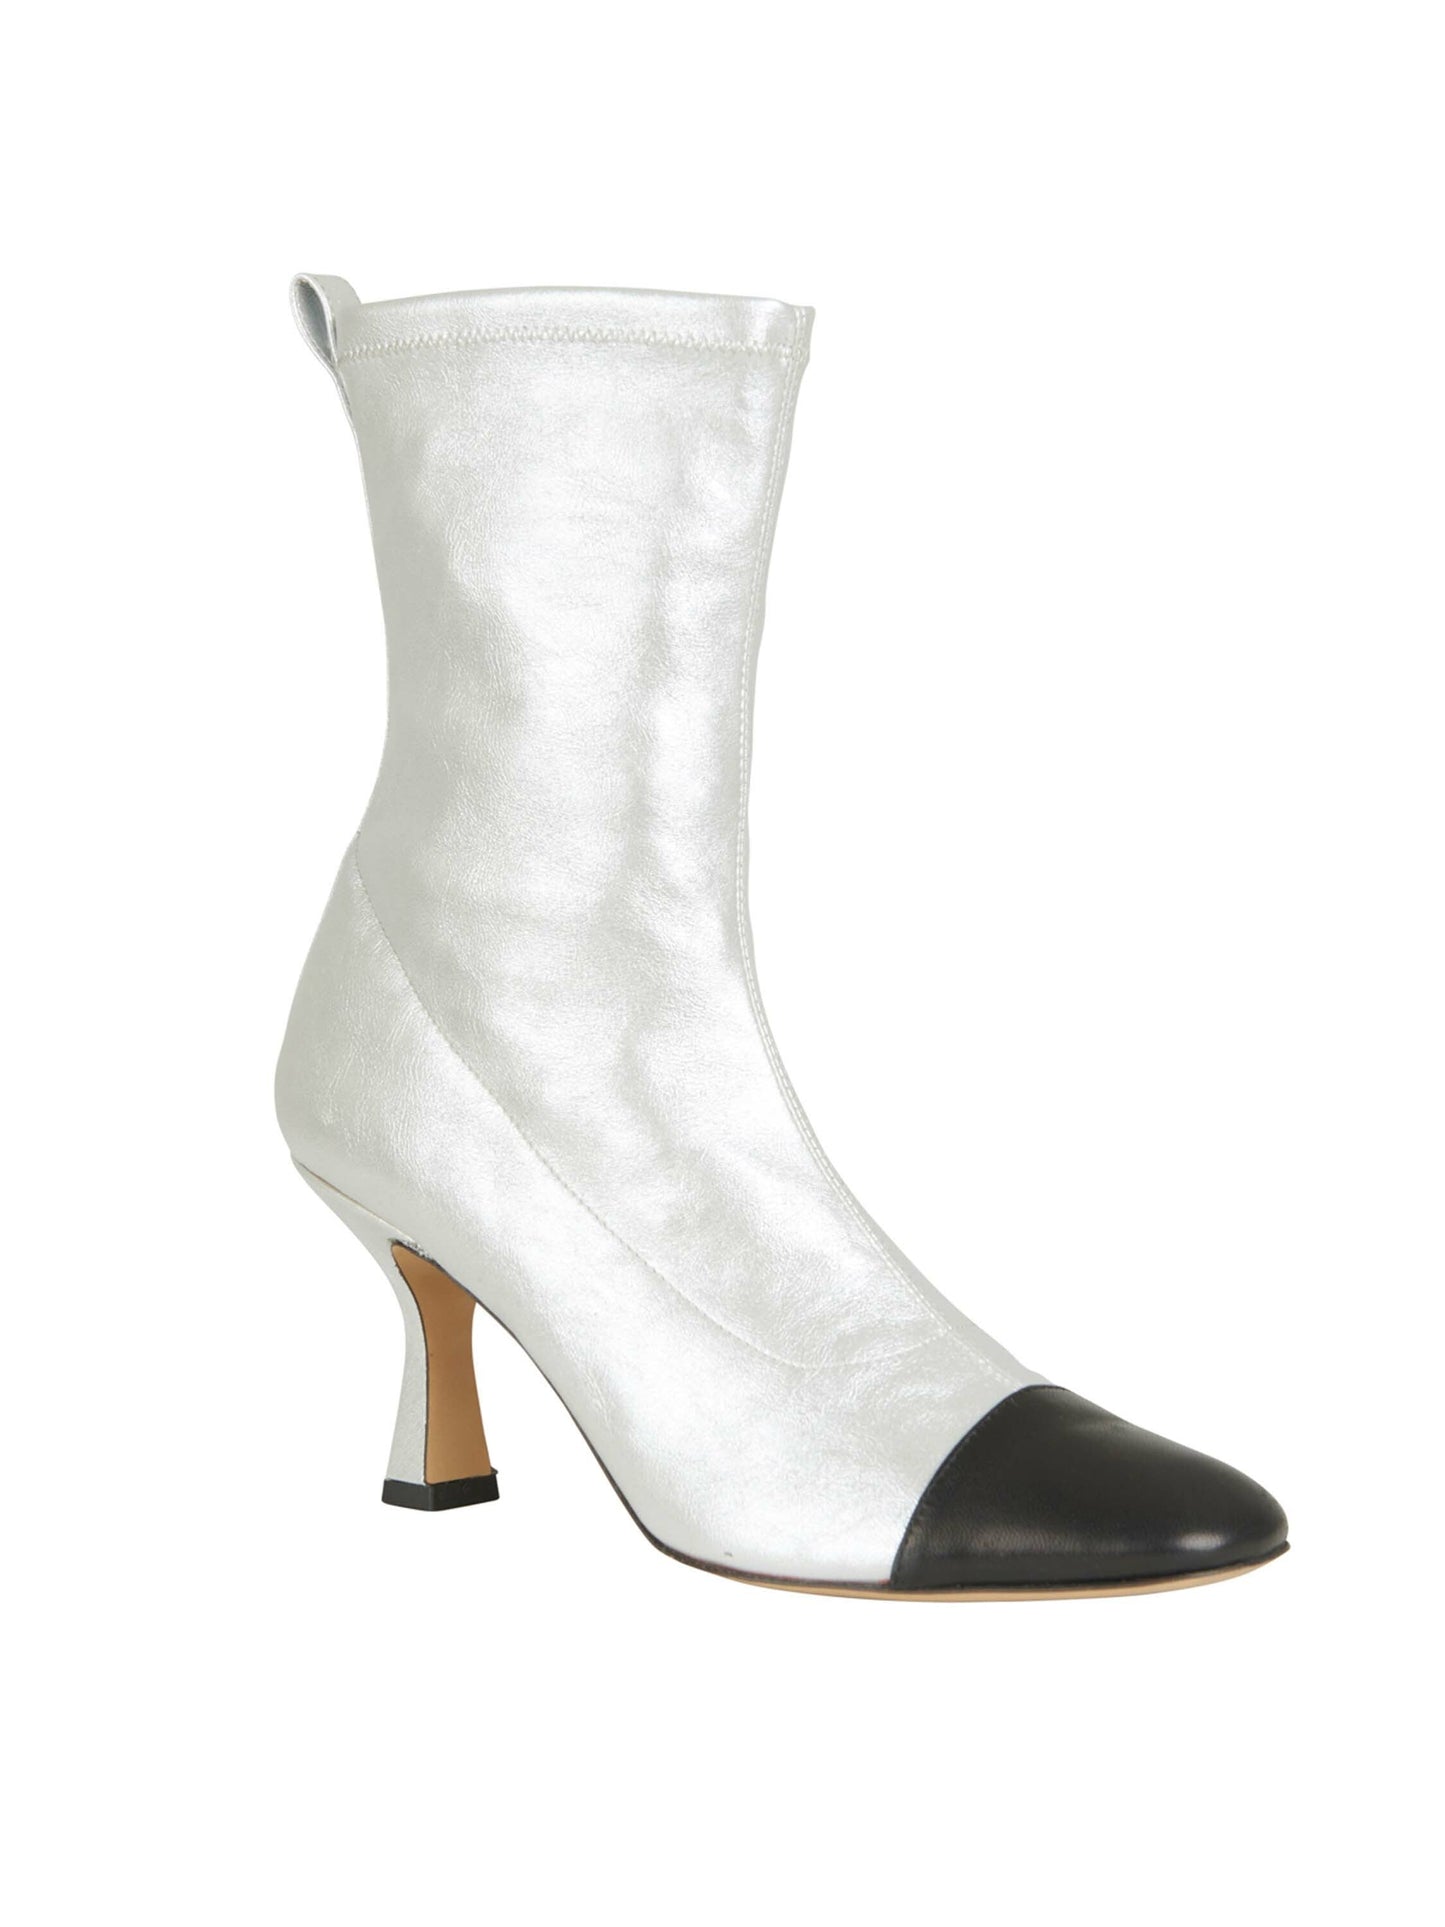 White satin mid-calf Jelena Heel Boots Silver-Black with a black cap-toe and a small, curved heel, crafted from stretchy leather, isolated on a white background.